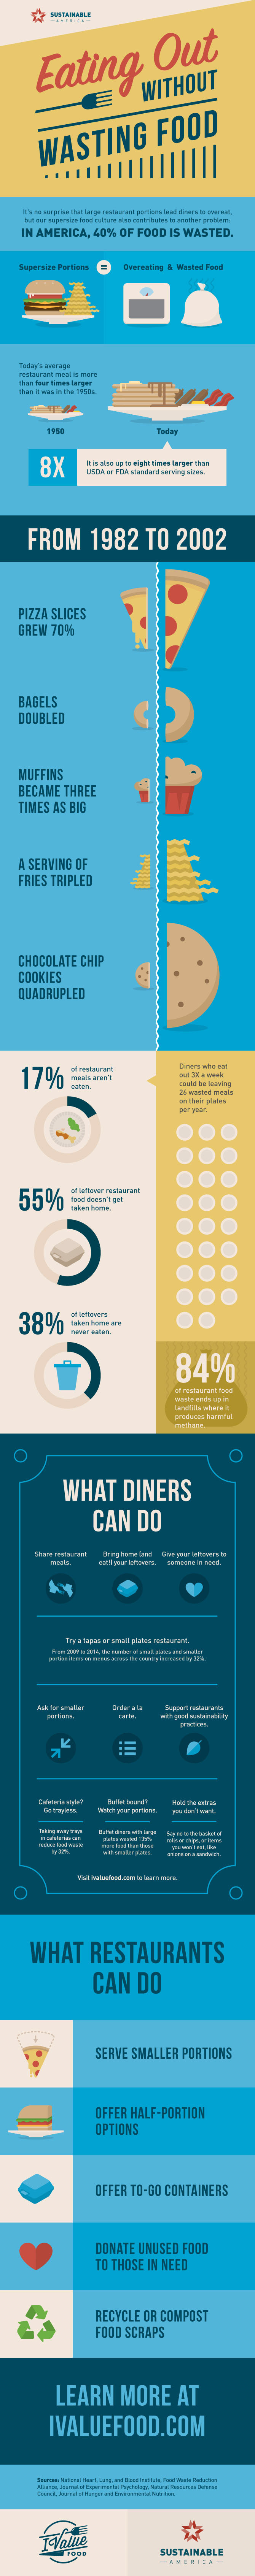 Eating Out without Wasting Food Infographic